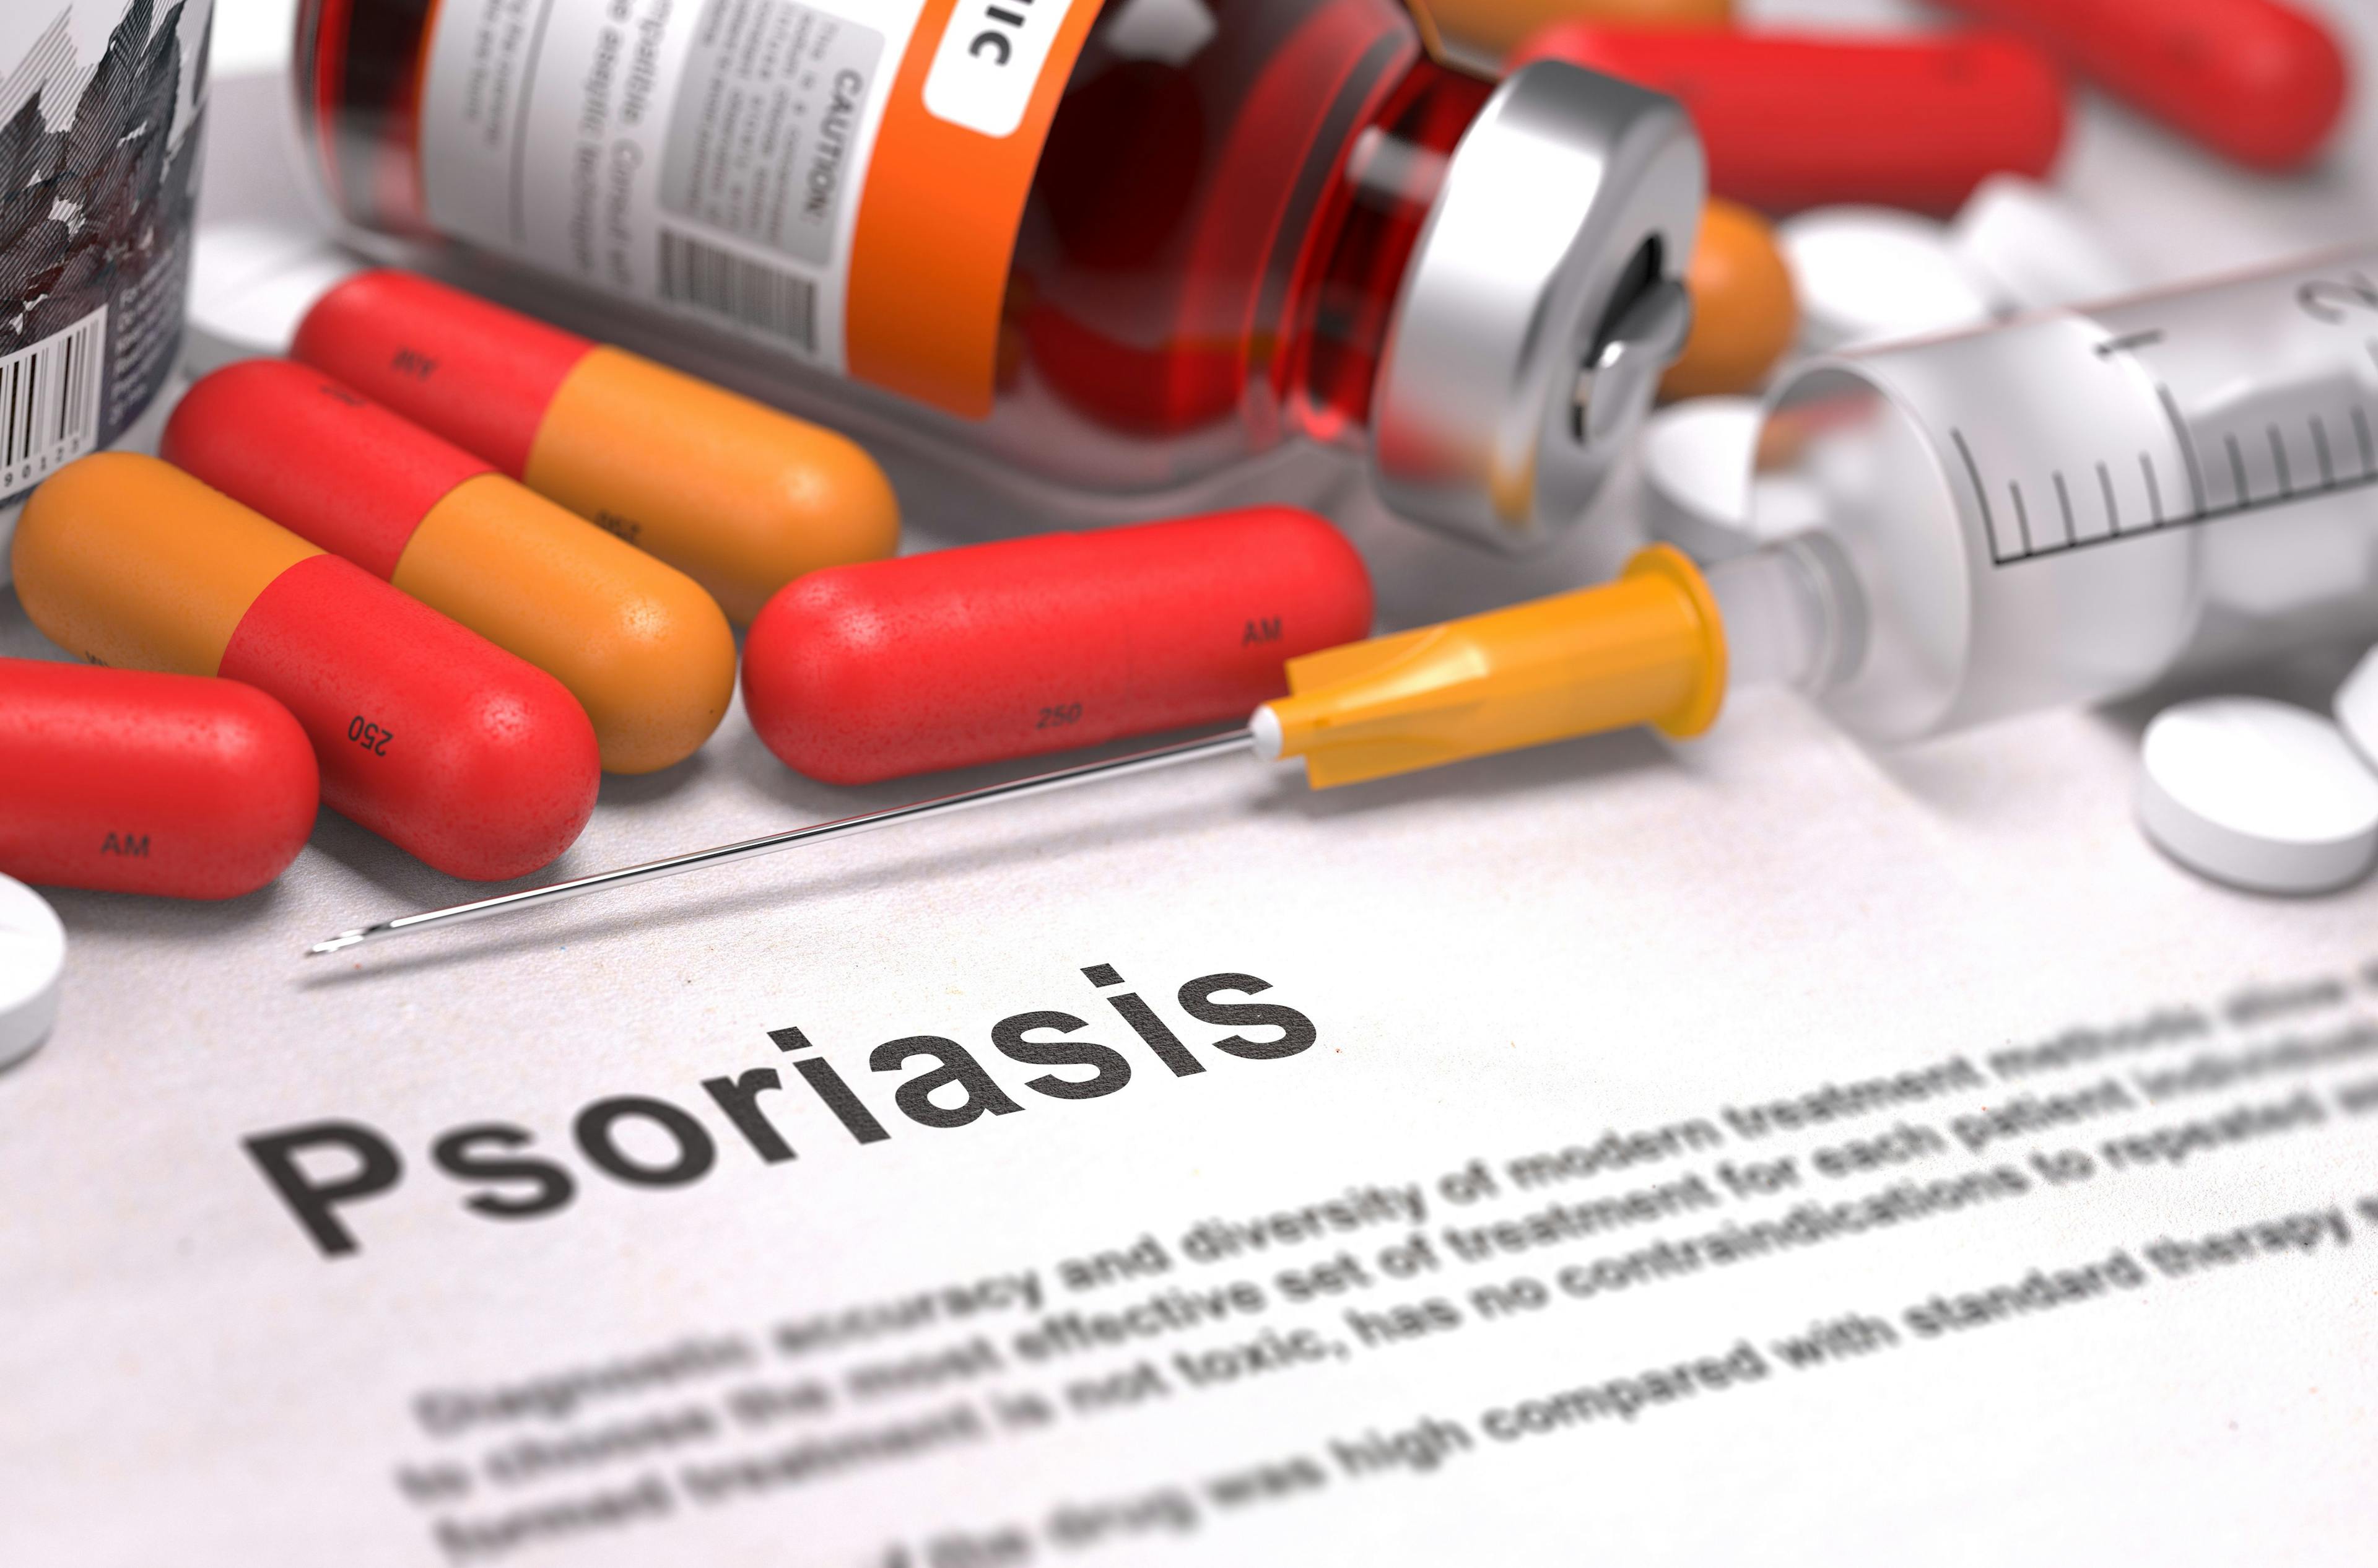 Deucravacitinib Shown More Effective Than Apremilast in Treating Moderate to Severe Plaque Psoriasis in Phase 3 Trials